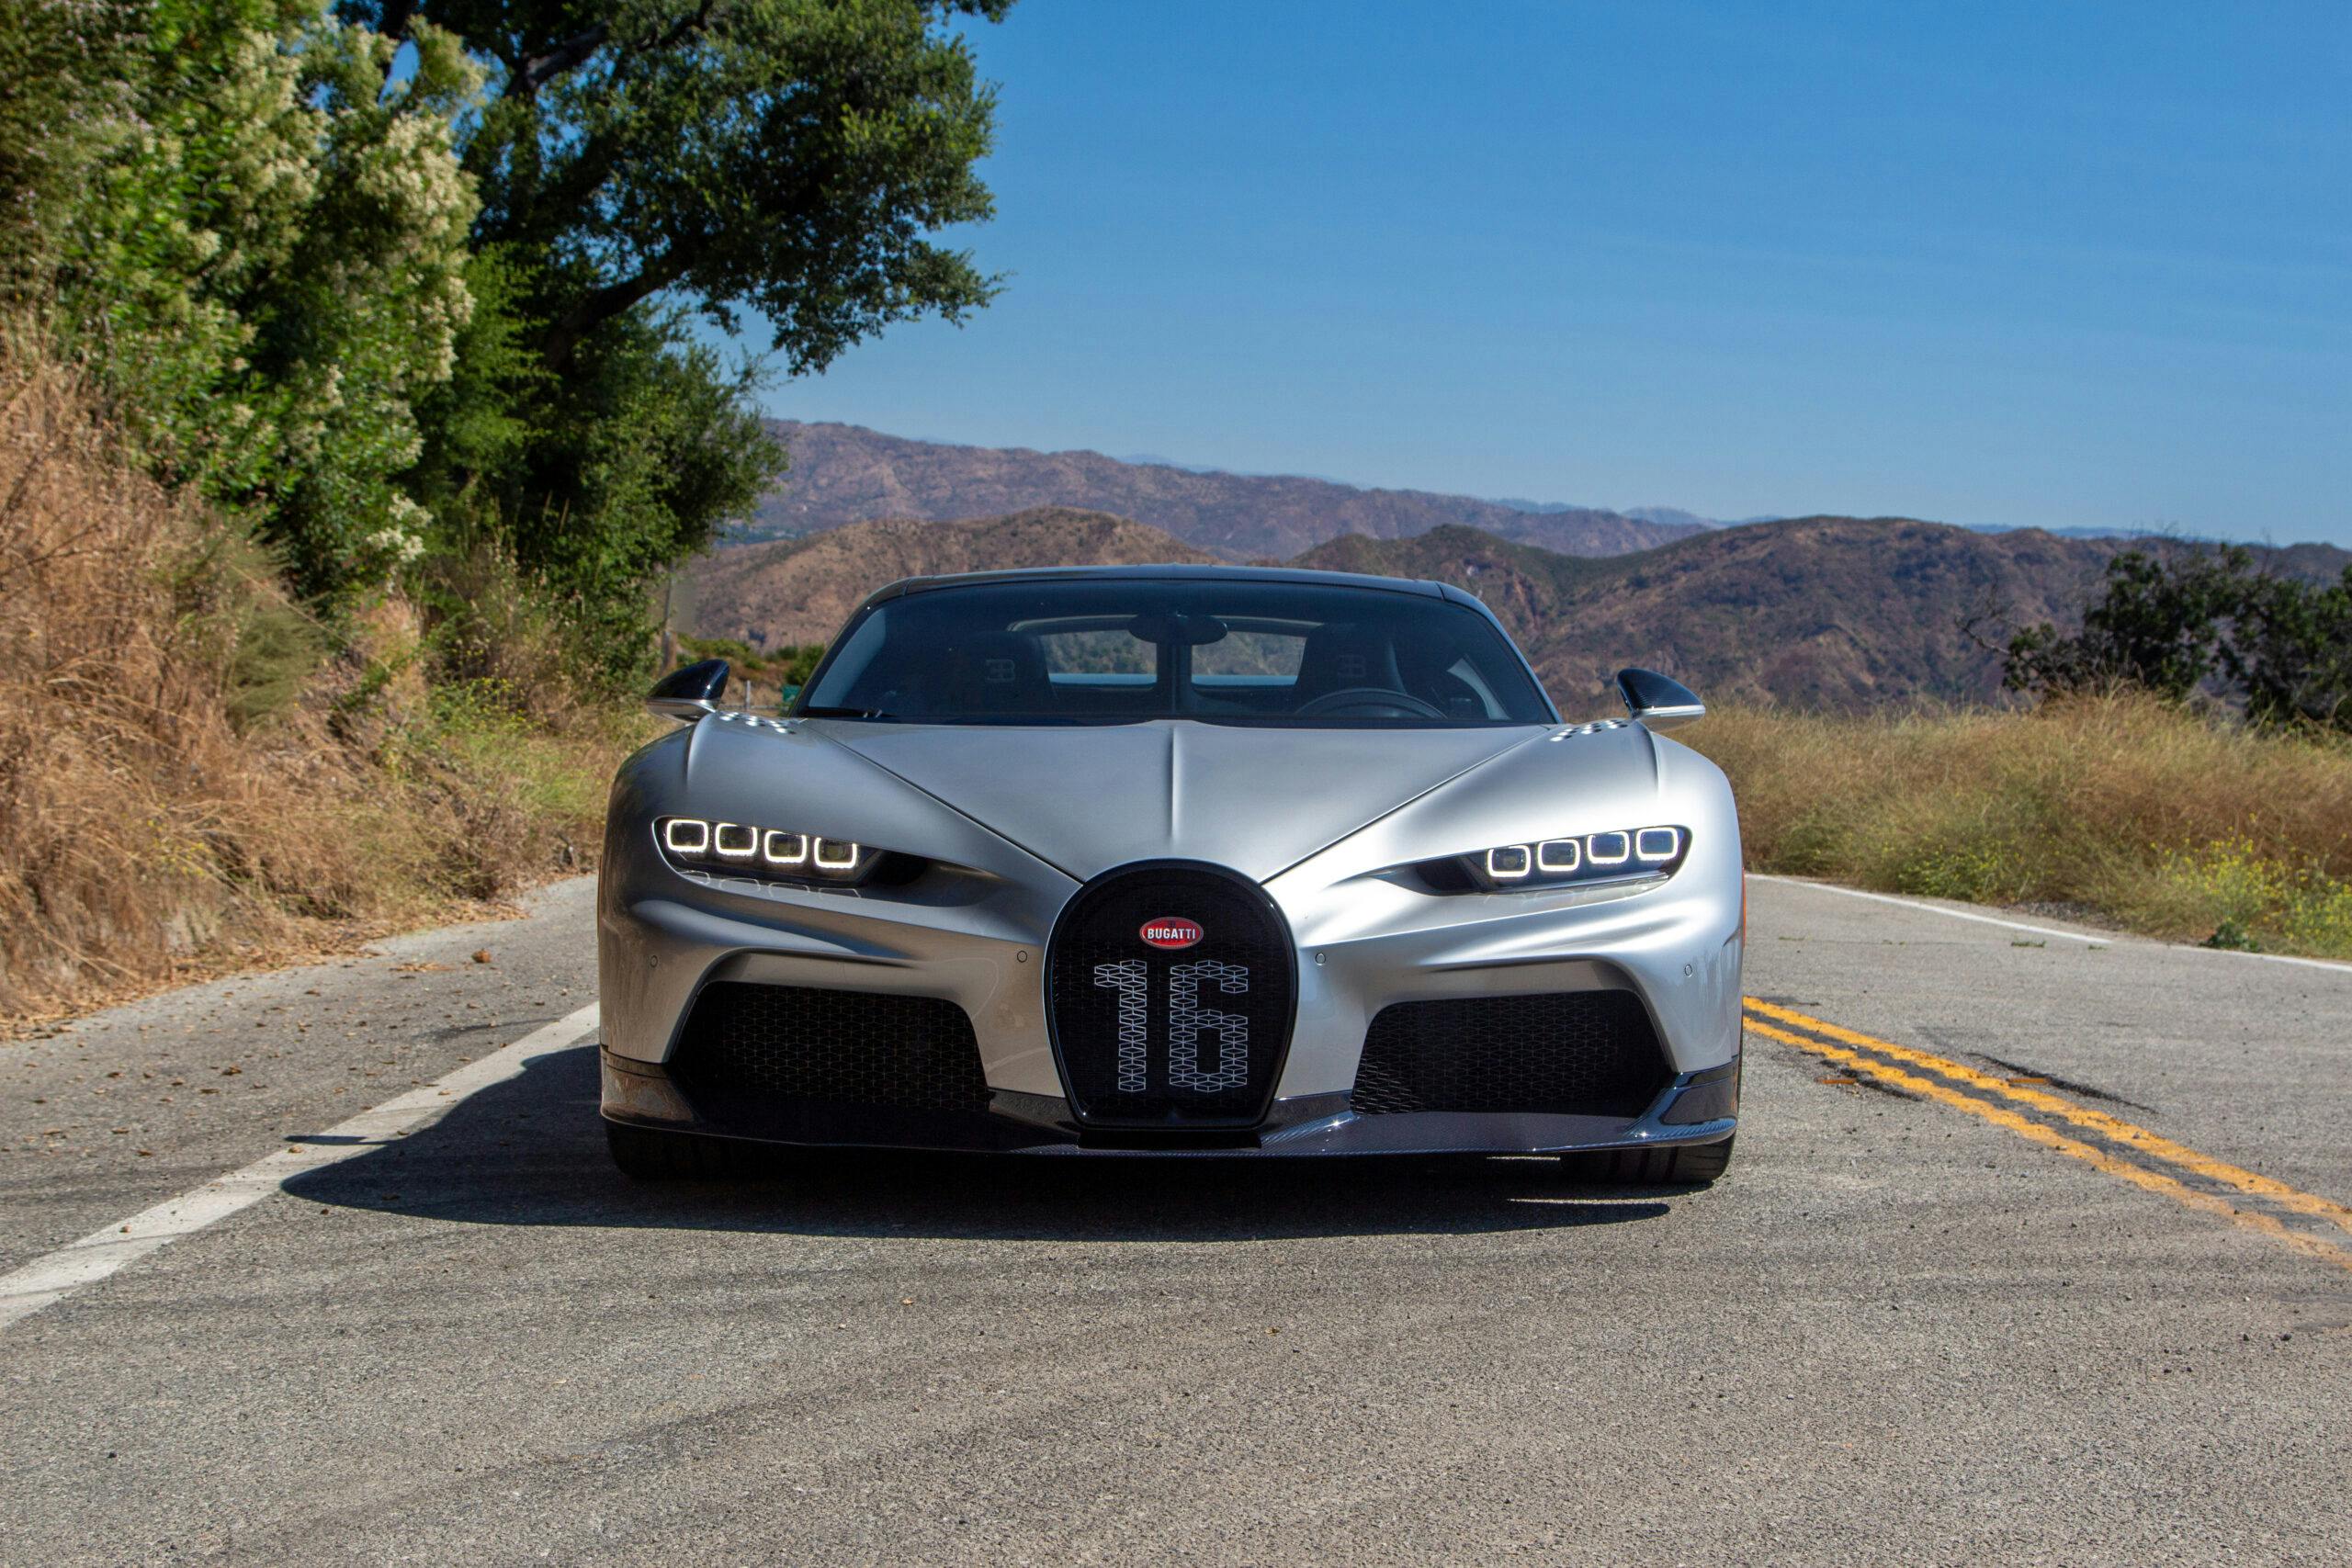 This Is What It's Like To Drive The 273mph Bugatti Chiron Super Sport